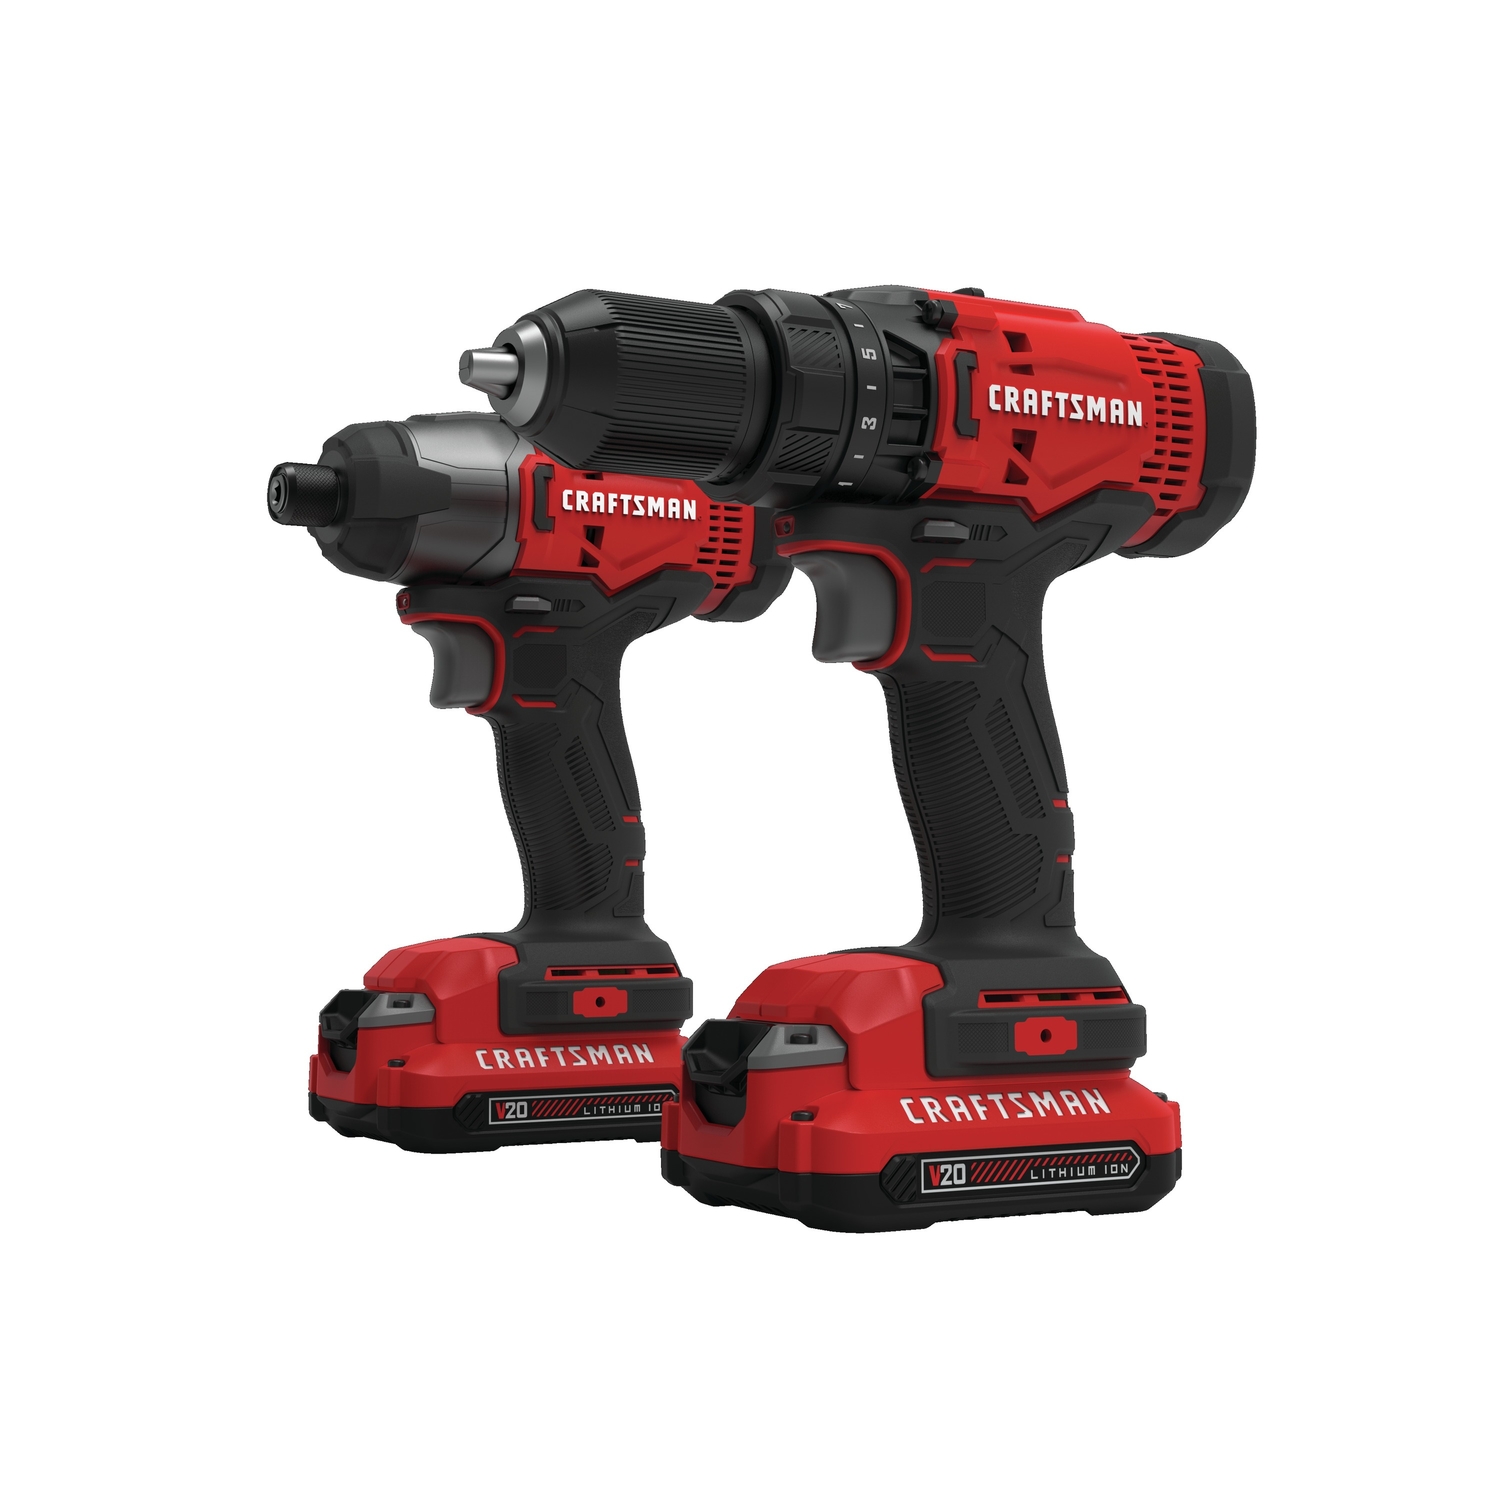 Craftsman V20 Cordless Brushed 2 Tool Drill/Driver and Impact Driver Kit